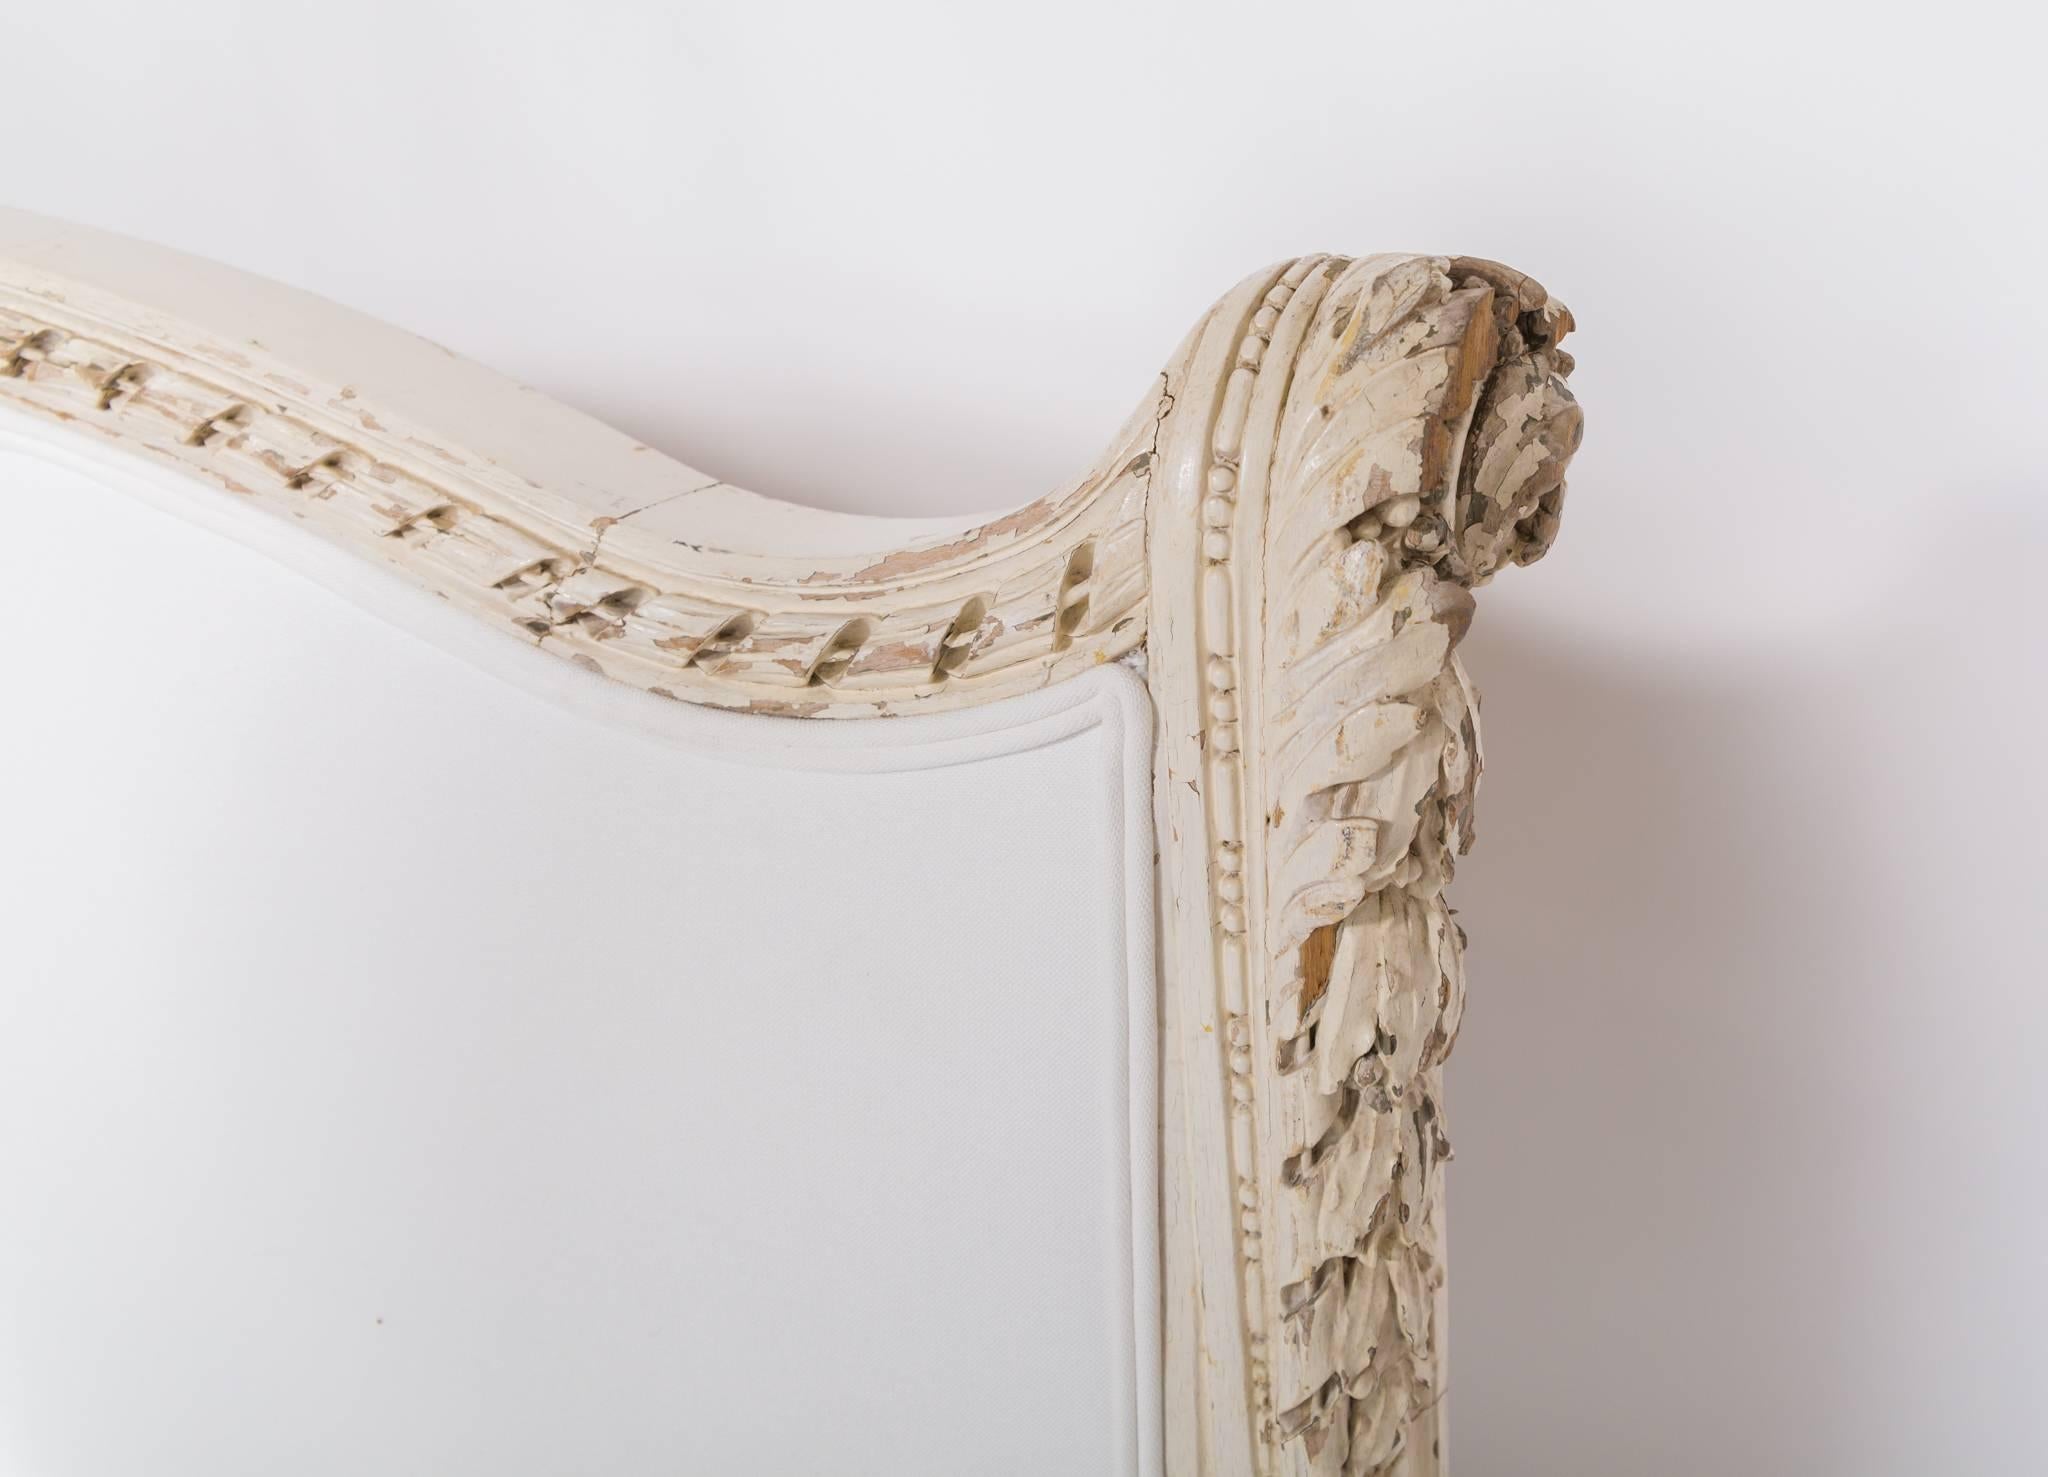 Tara Shaw Antiques - This stunning 19th century bed is skillfully carved and features a beautiful antique white paint. The headboard is upholstered. The detail in this bed indicate that it is a French piece filled with old world European character